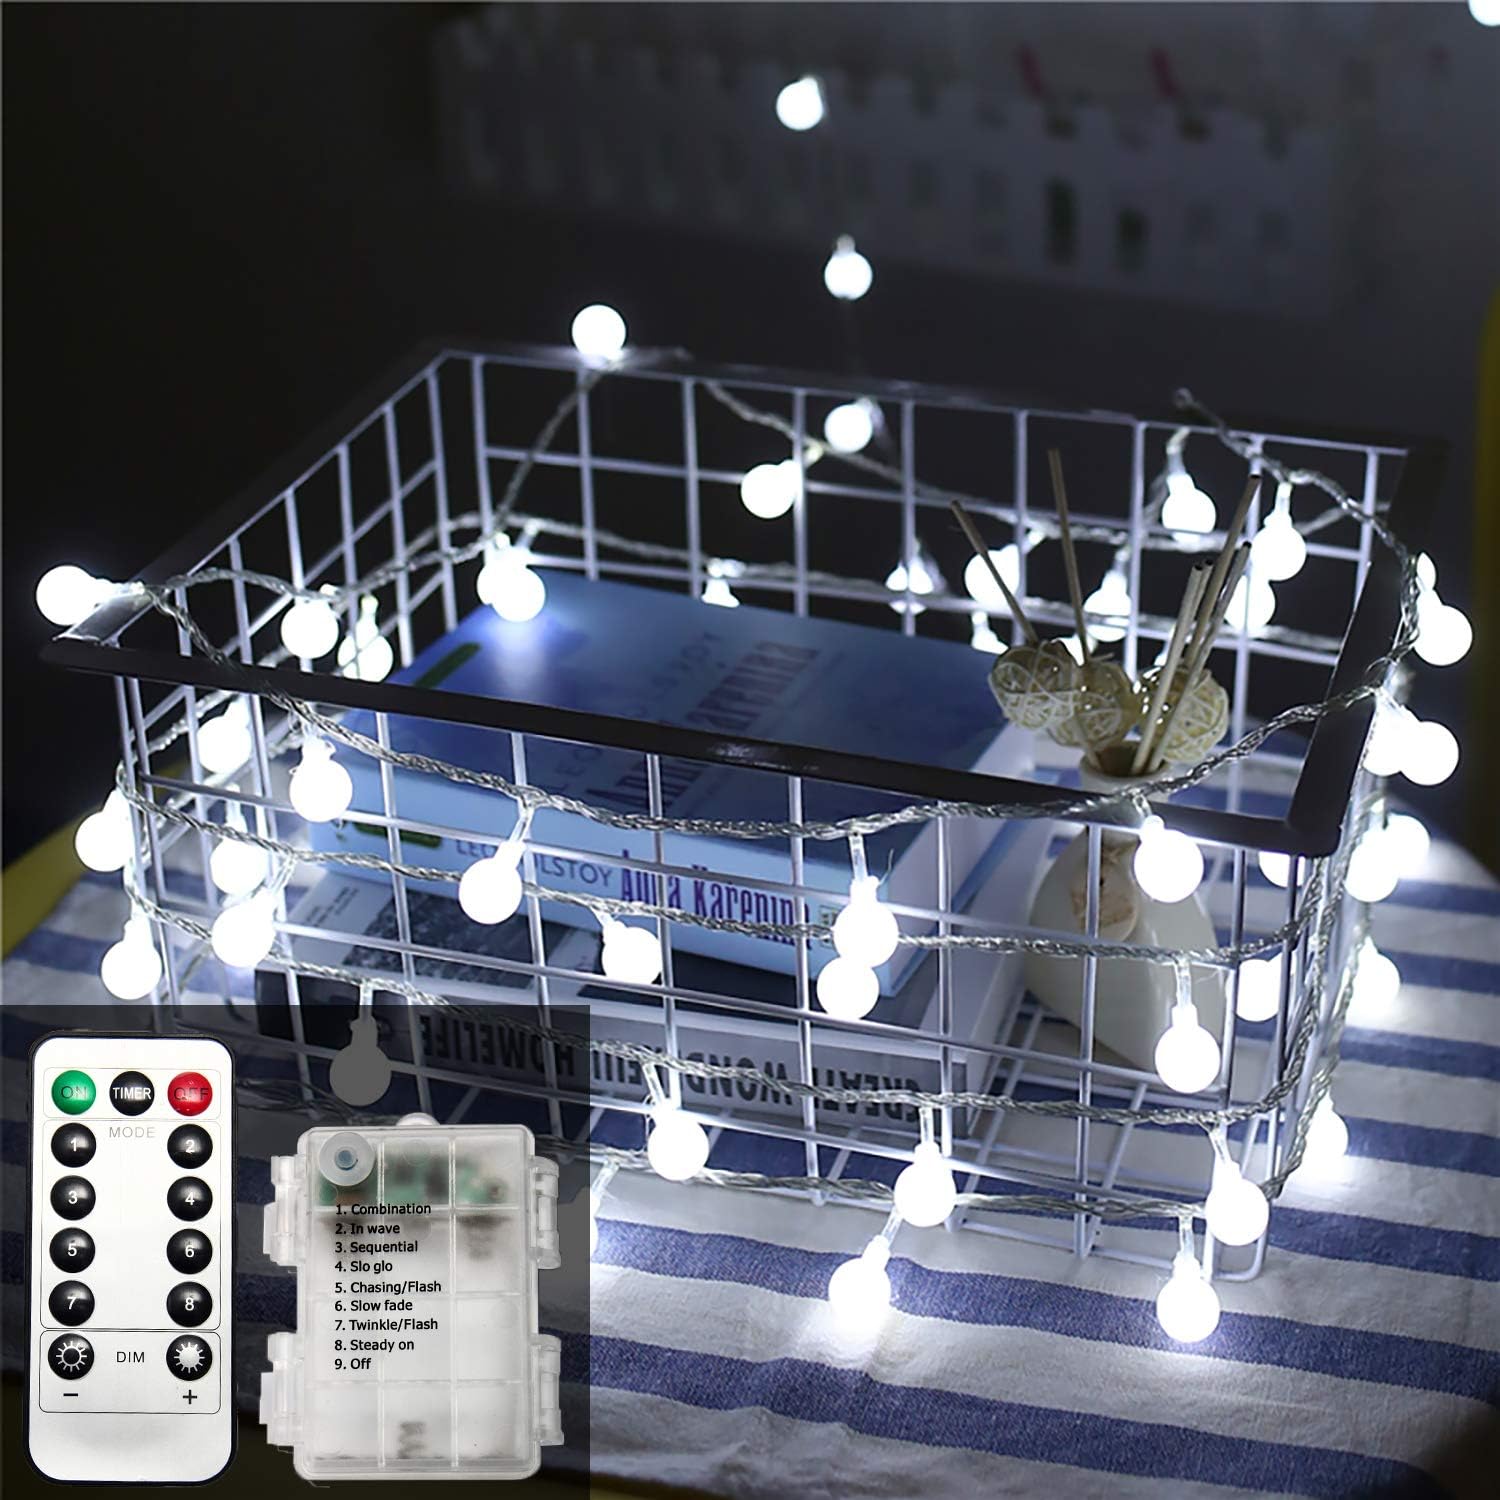 ZOUTOG Battery Outdoor String Lights, 49ft 120 LED Bulb White Globe String Lights with Remote Controller, Decorative Timer Fairy Light for Christmas/Wedding/Party Indoor and Outdoor, Cool White